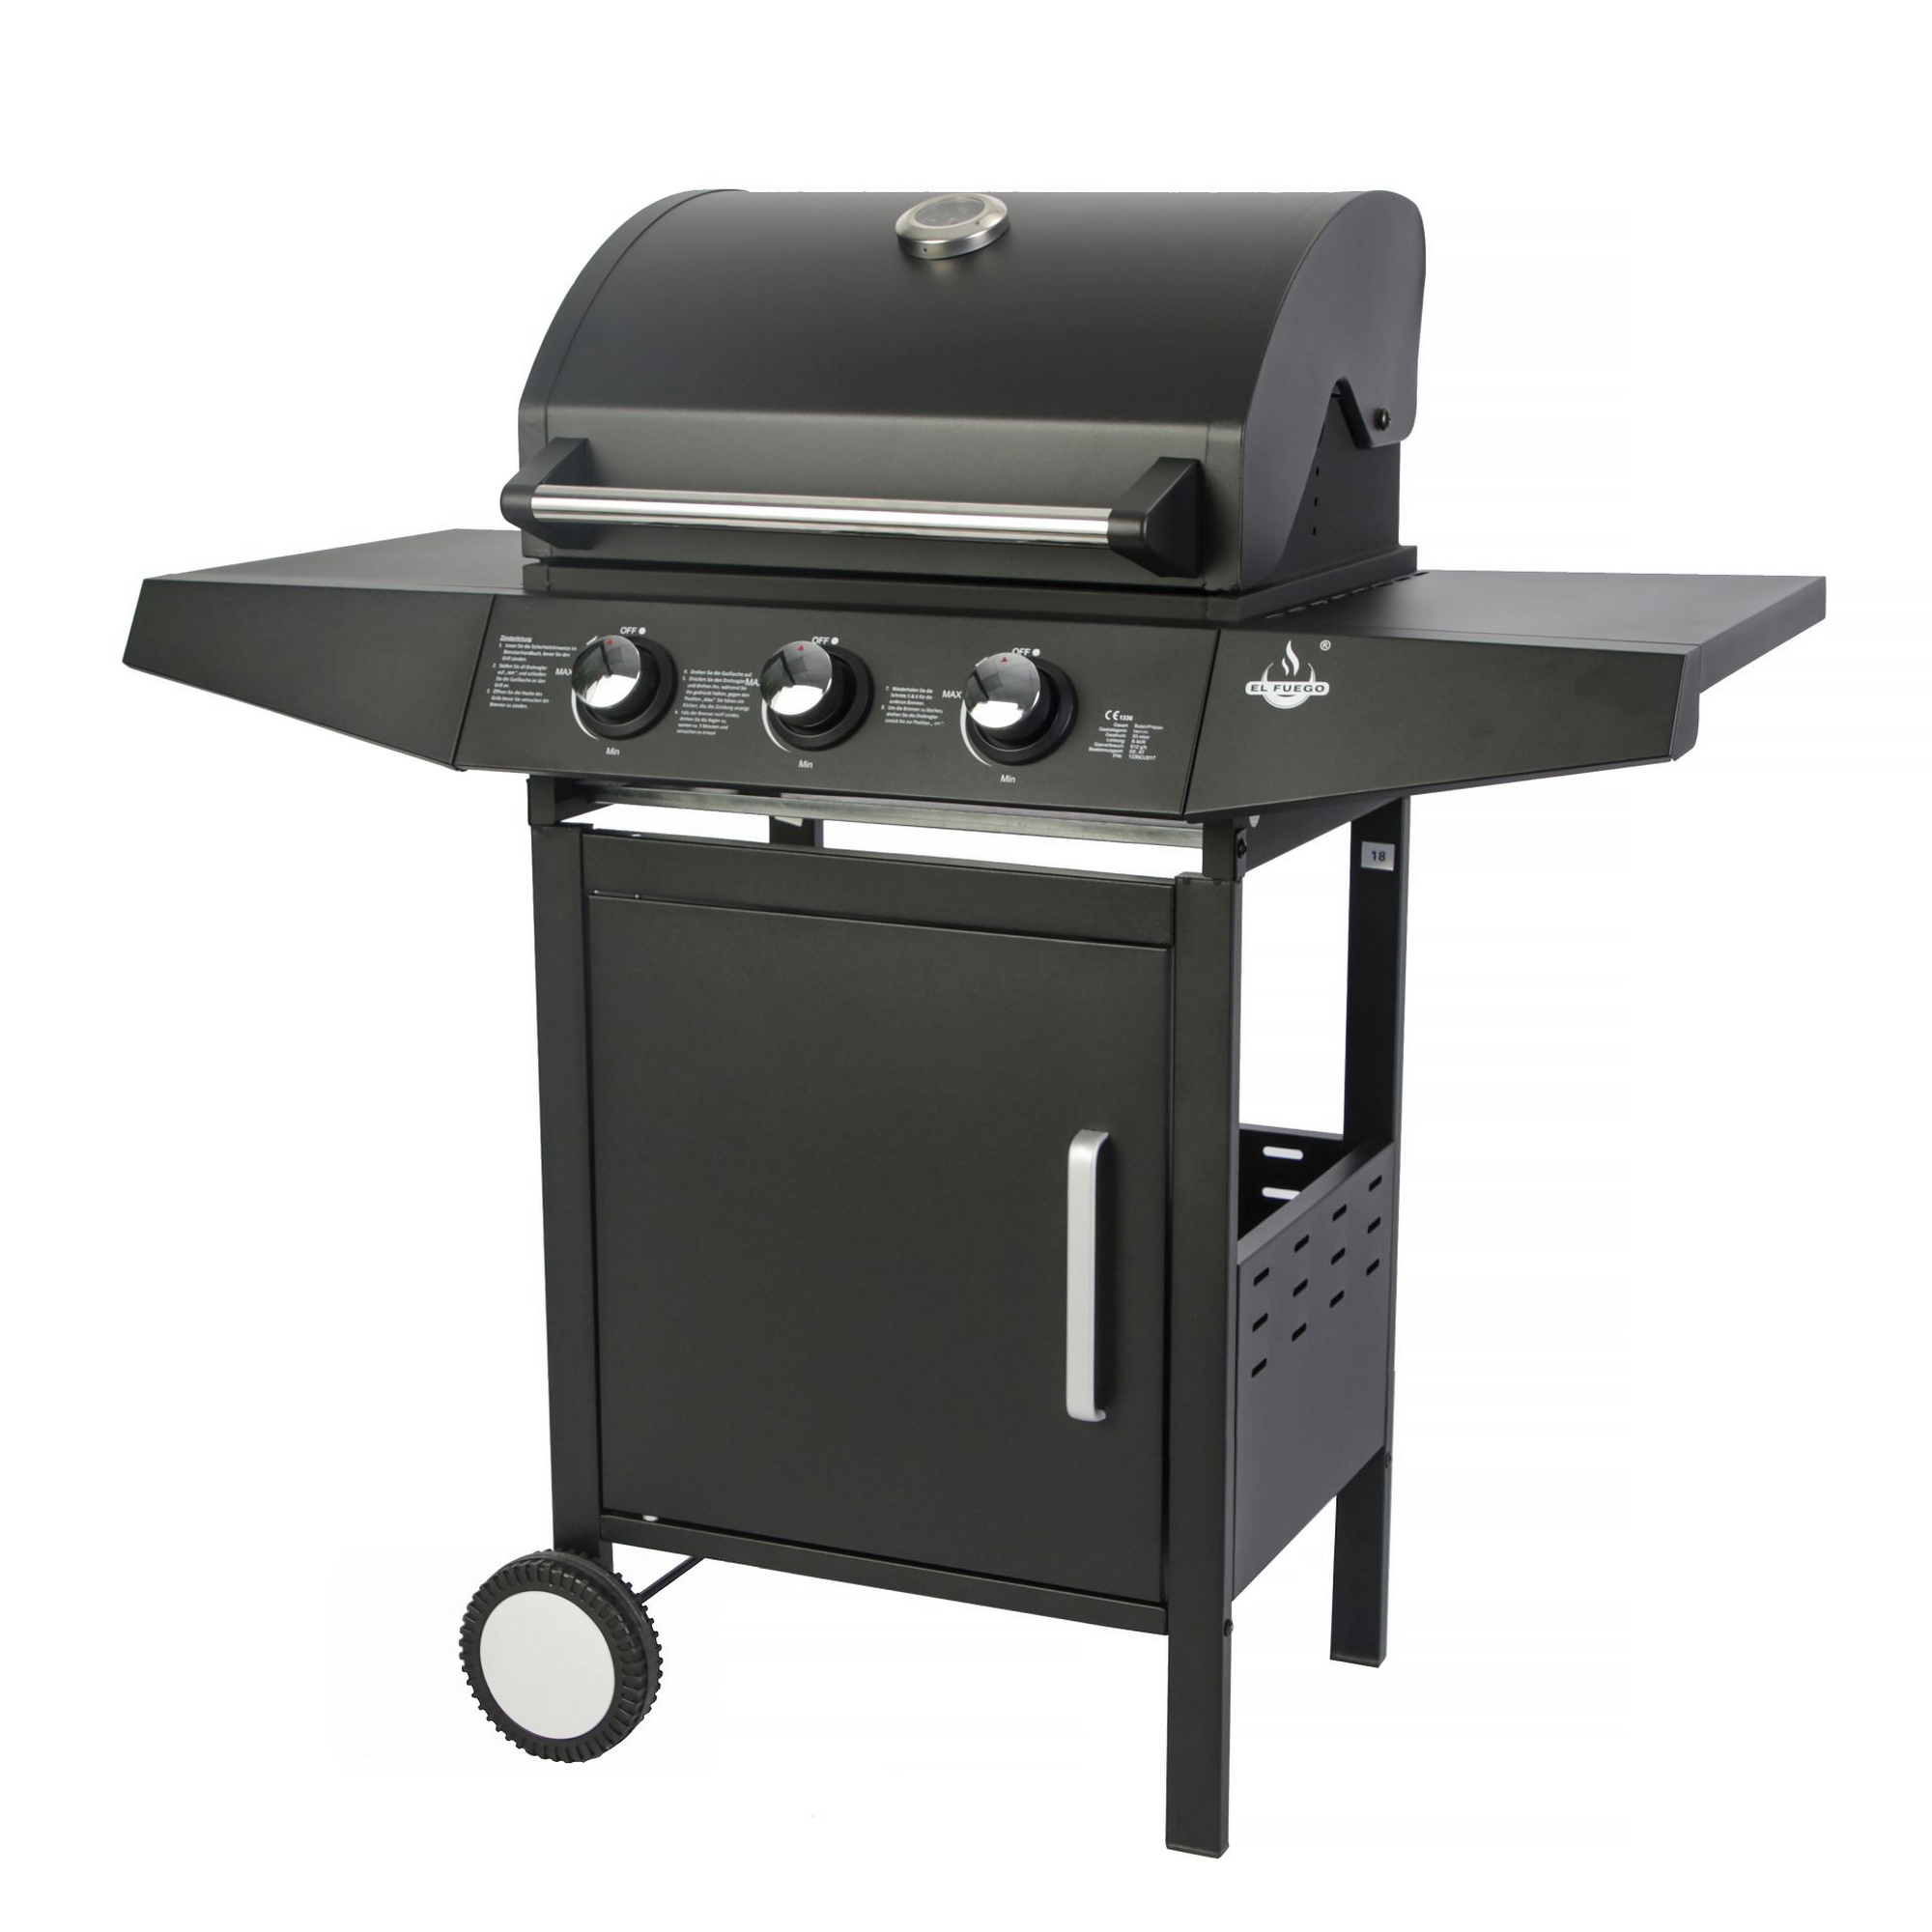 Gasgrill 'San Angelo' schwarz 109,6 x 110,5 x 53 cm + product picture